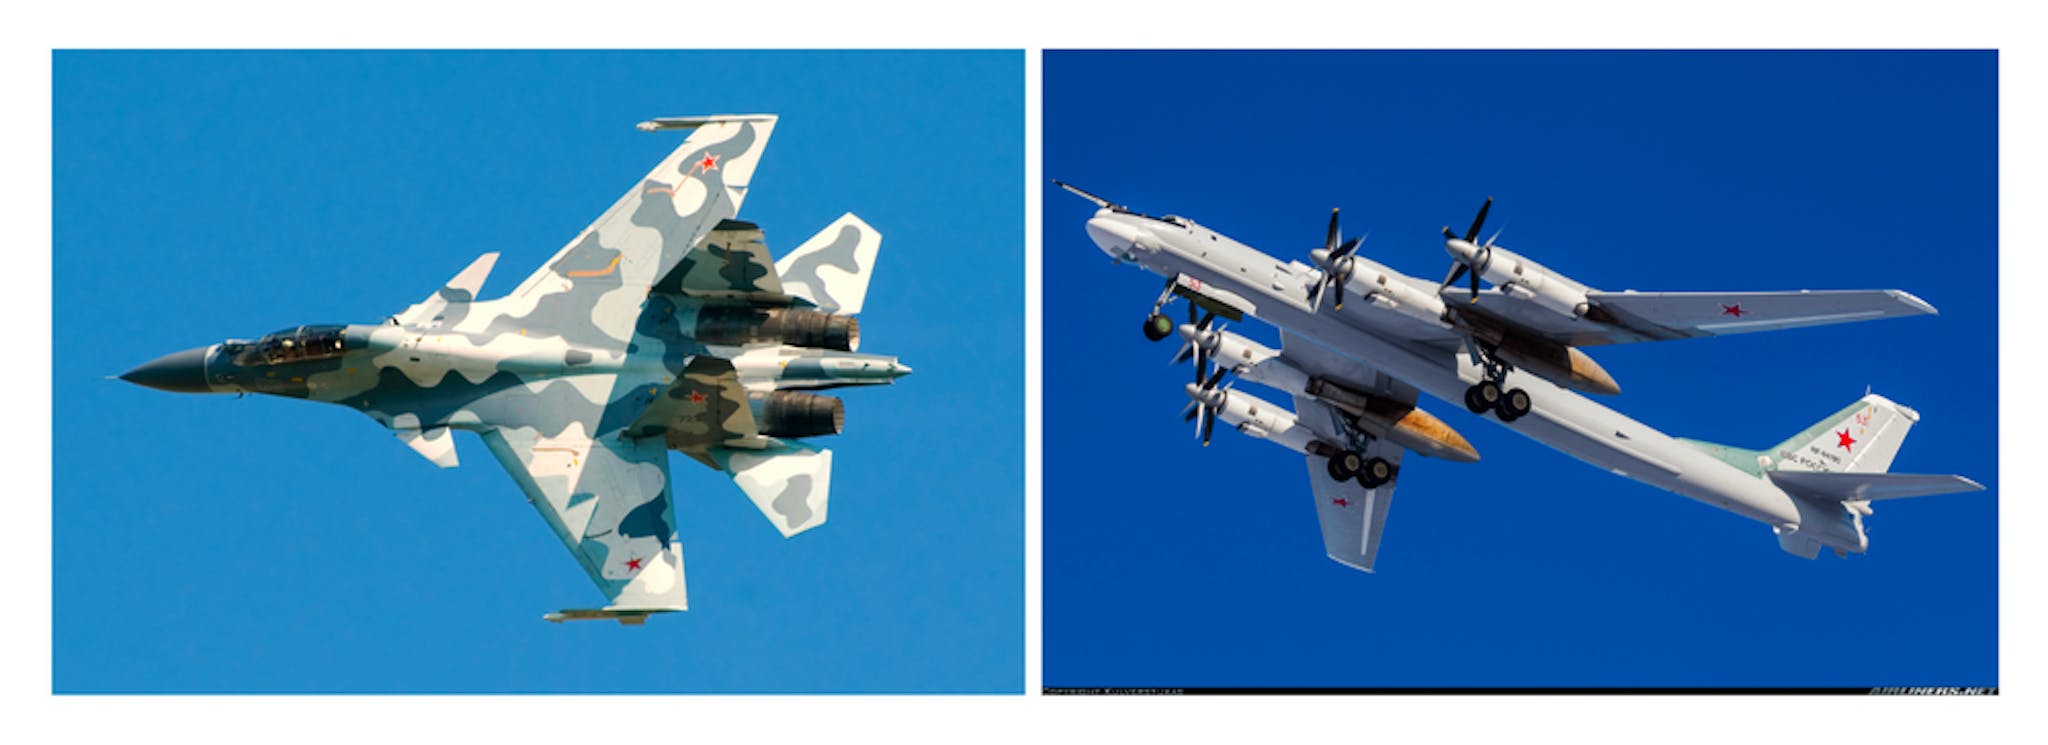 From left to right: (1) Su-30, (2) Tu-95